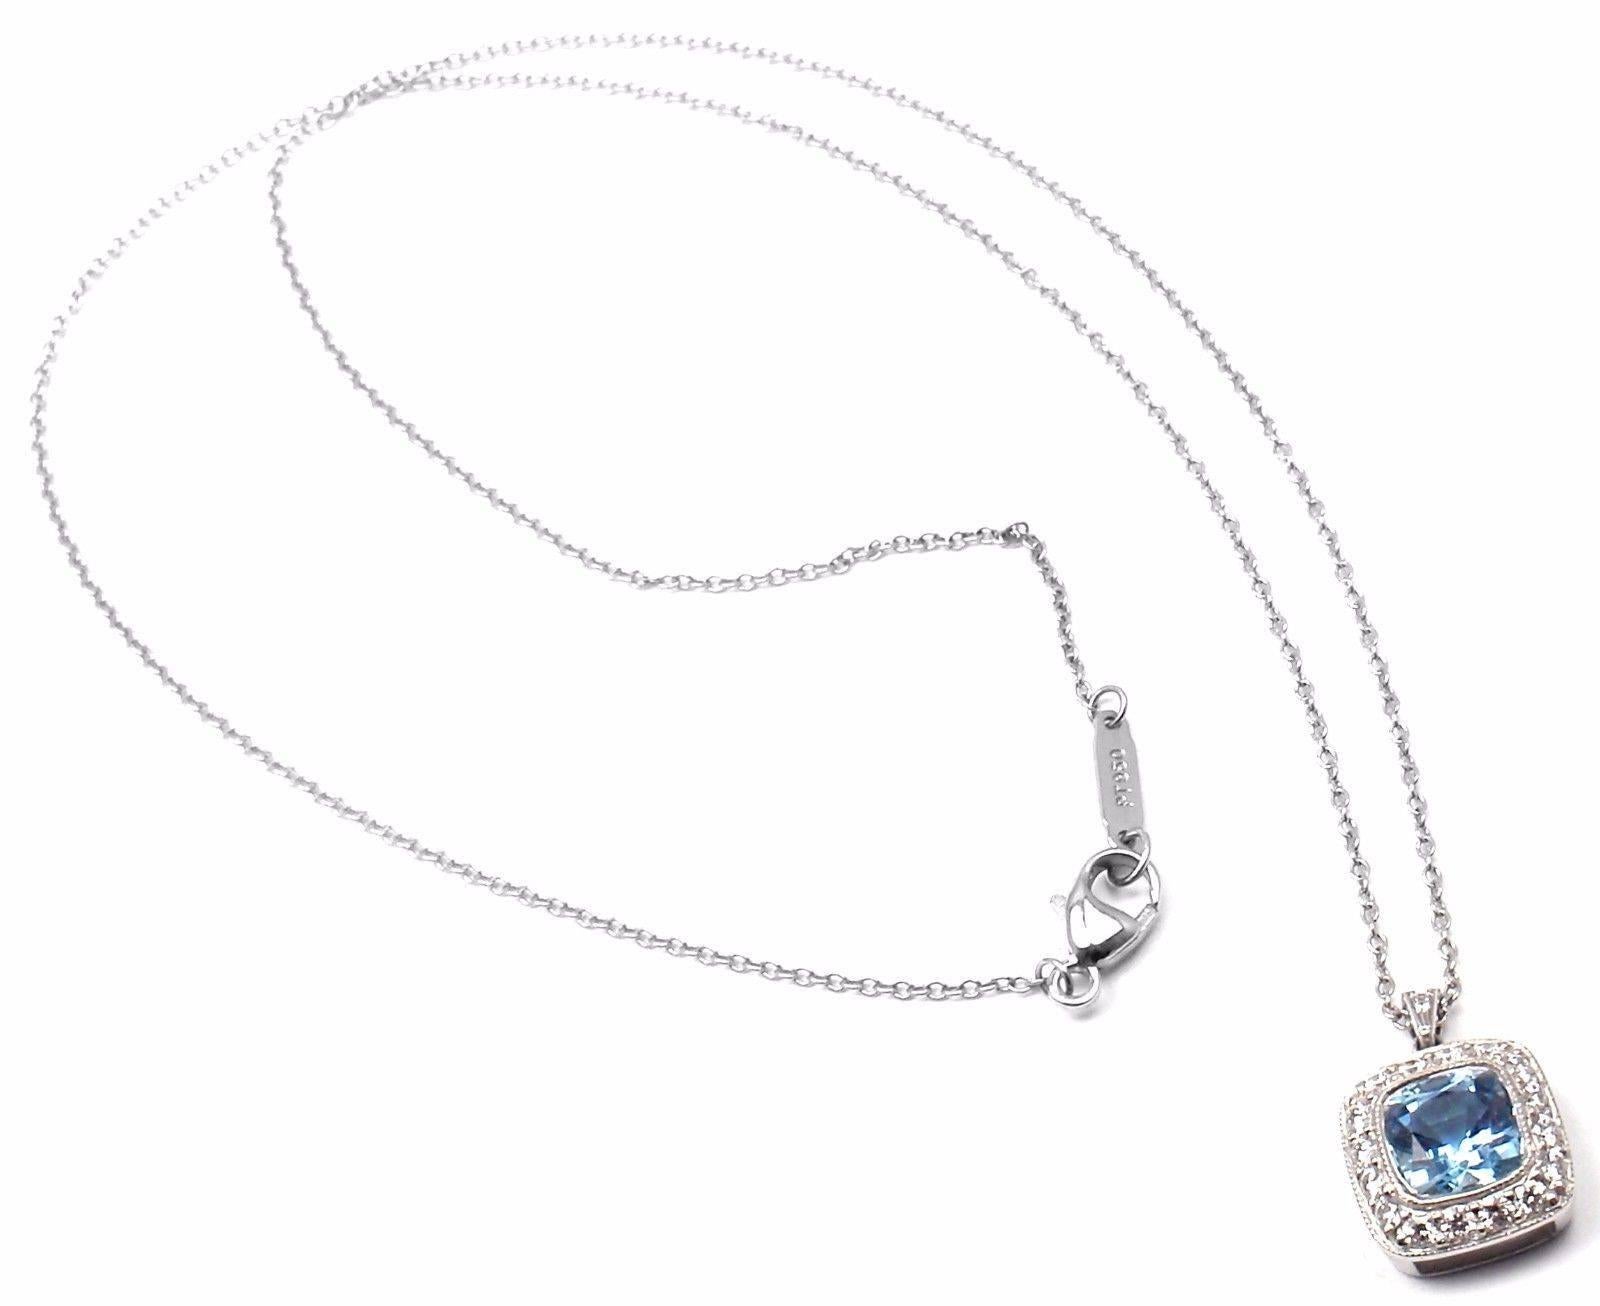 Platinum Diamond and Aquamarine Legacy Pendant Necklace 
by Tiffany & Co.
With 18 round brilliant cut diamonds VS1 clarity, G color total weight approx. .26ct
1 aquamarine total weight approx. 2ct

Details:
Weight: 4.6 grams
Chain Length: